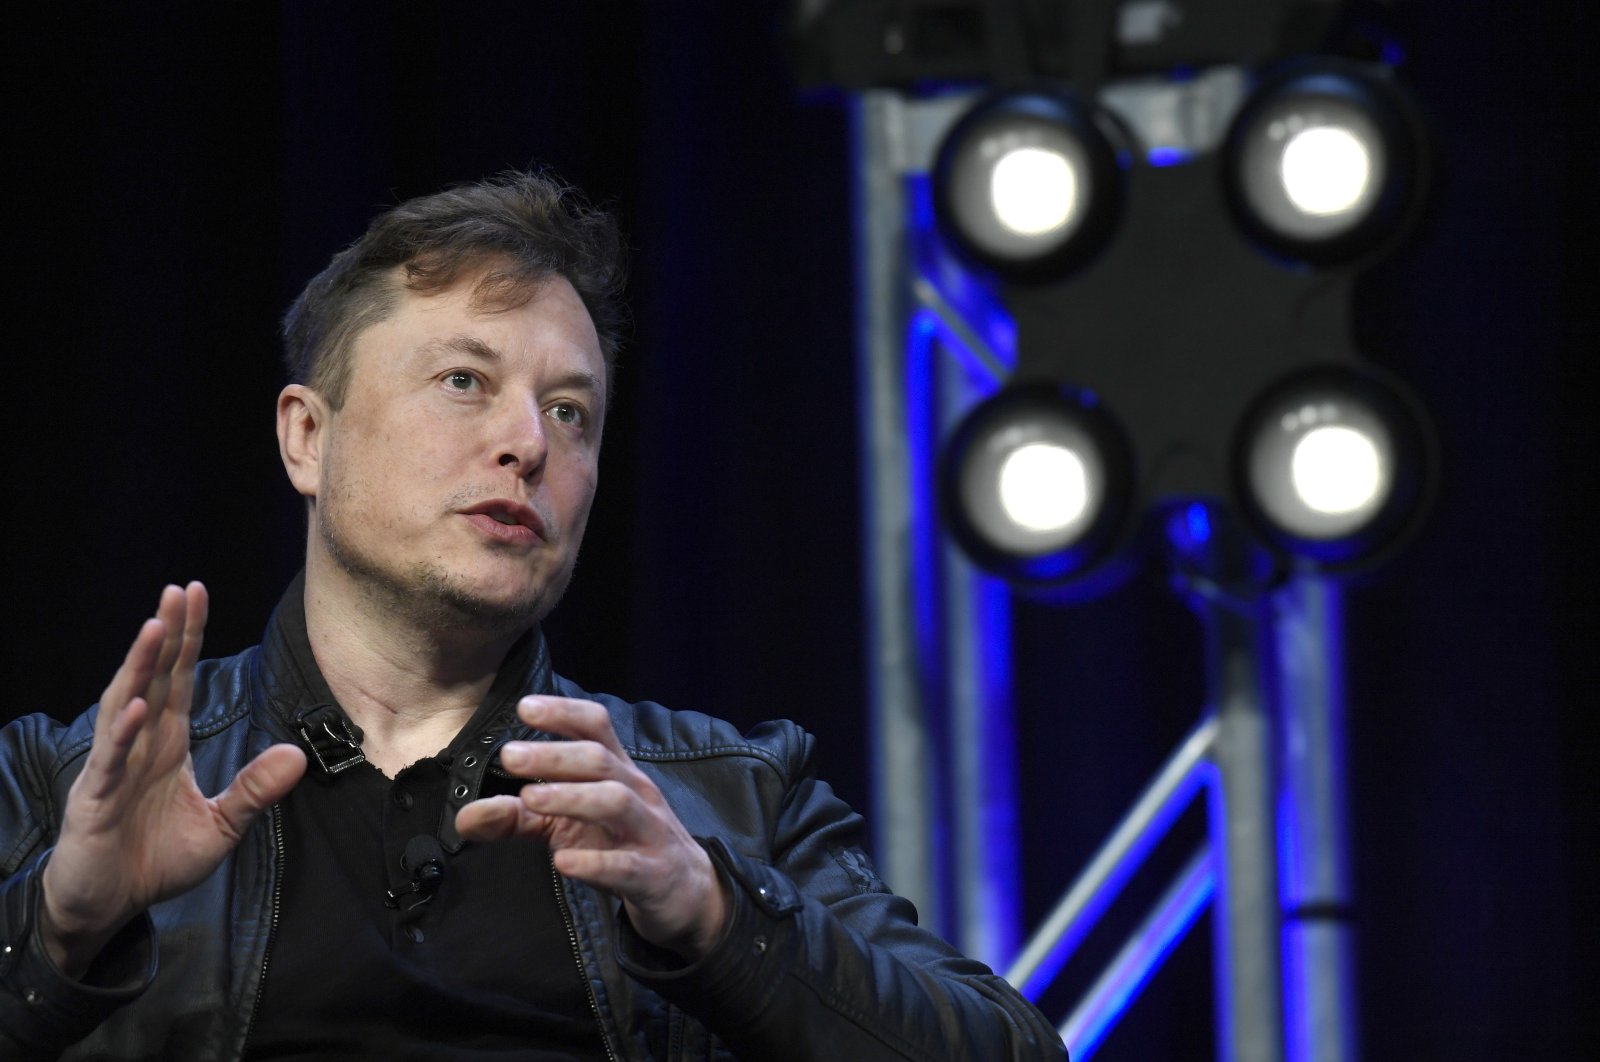  Tesla and SpaceX Chief Executive Officer Elon Musk speaks at the SATELLITE Conference and Exhibition in Washington. (AP Photo)